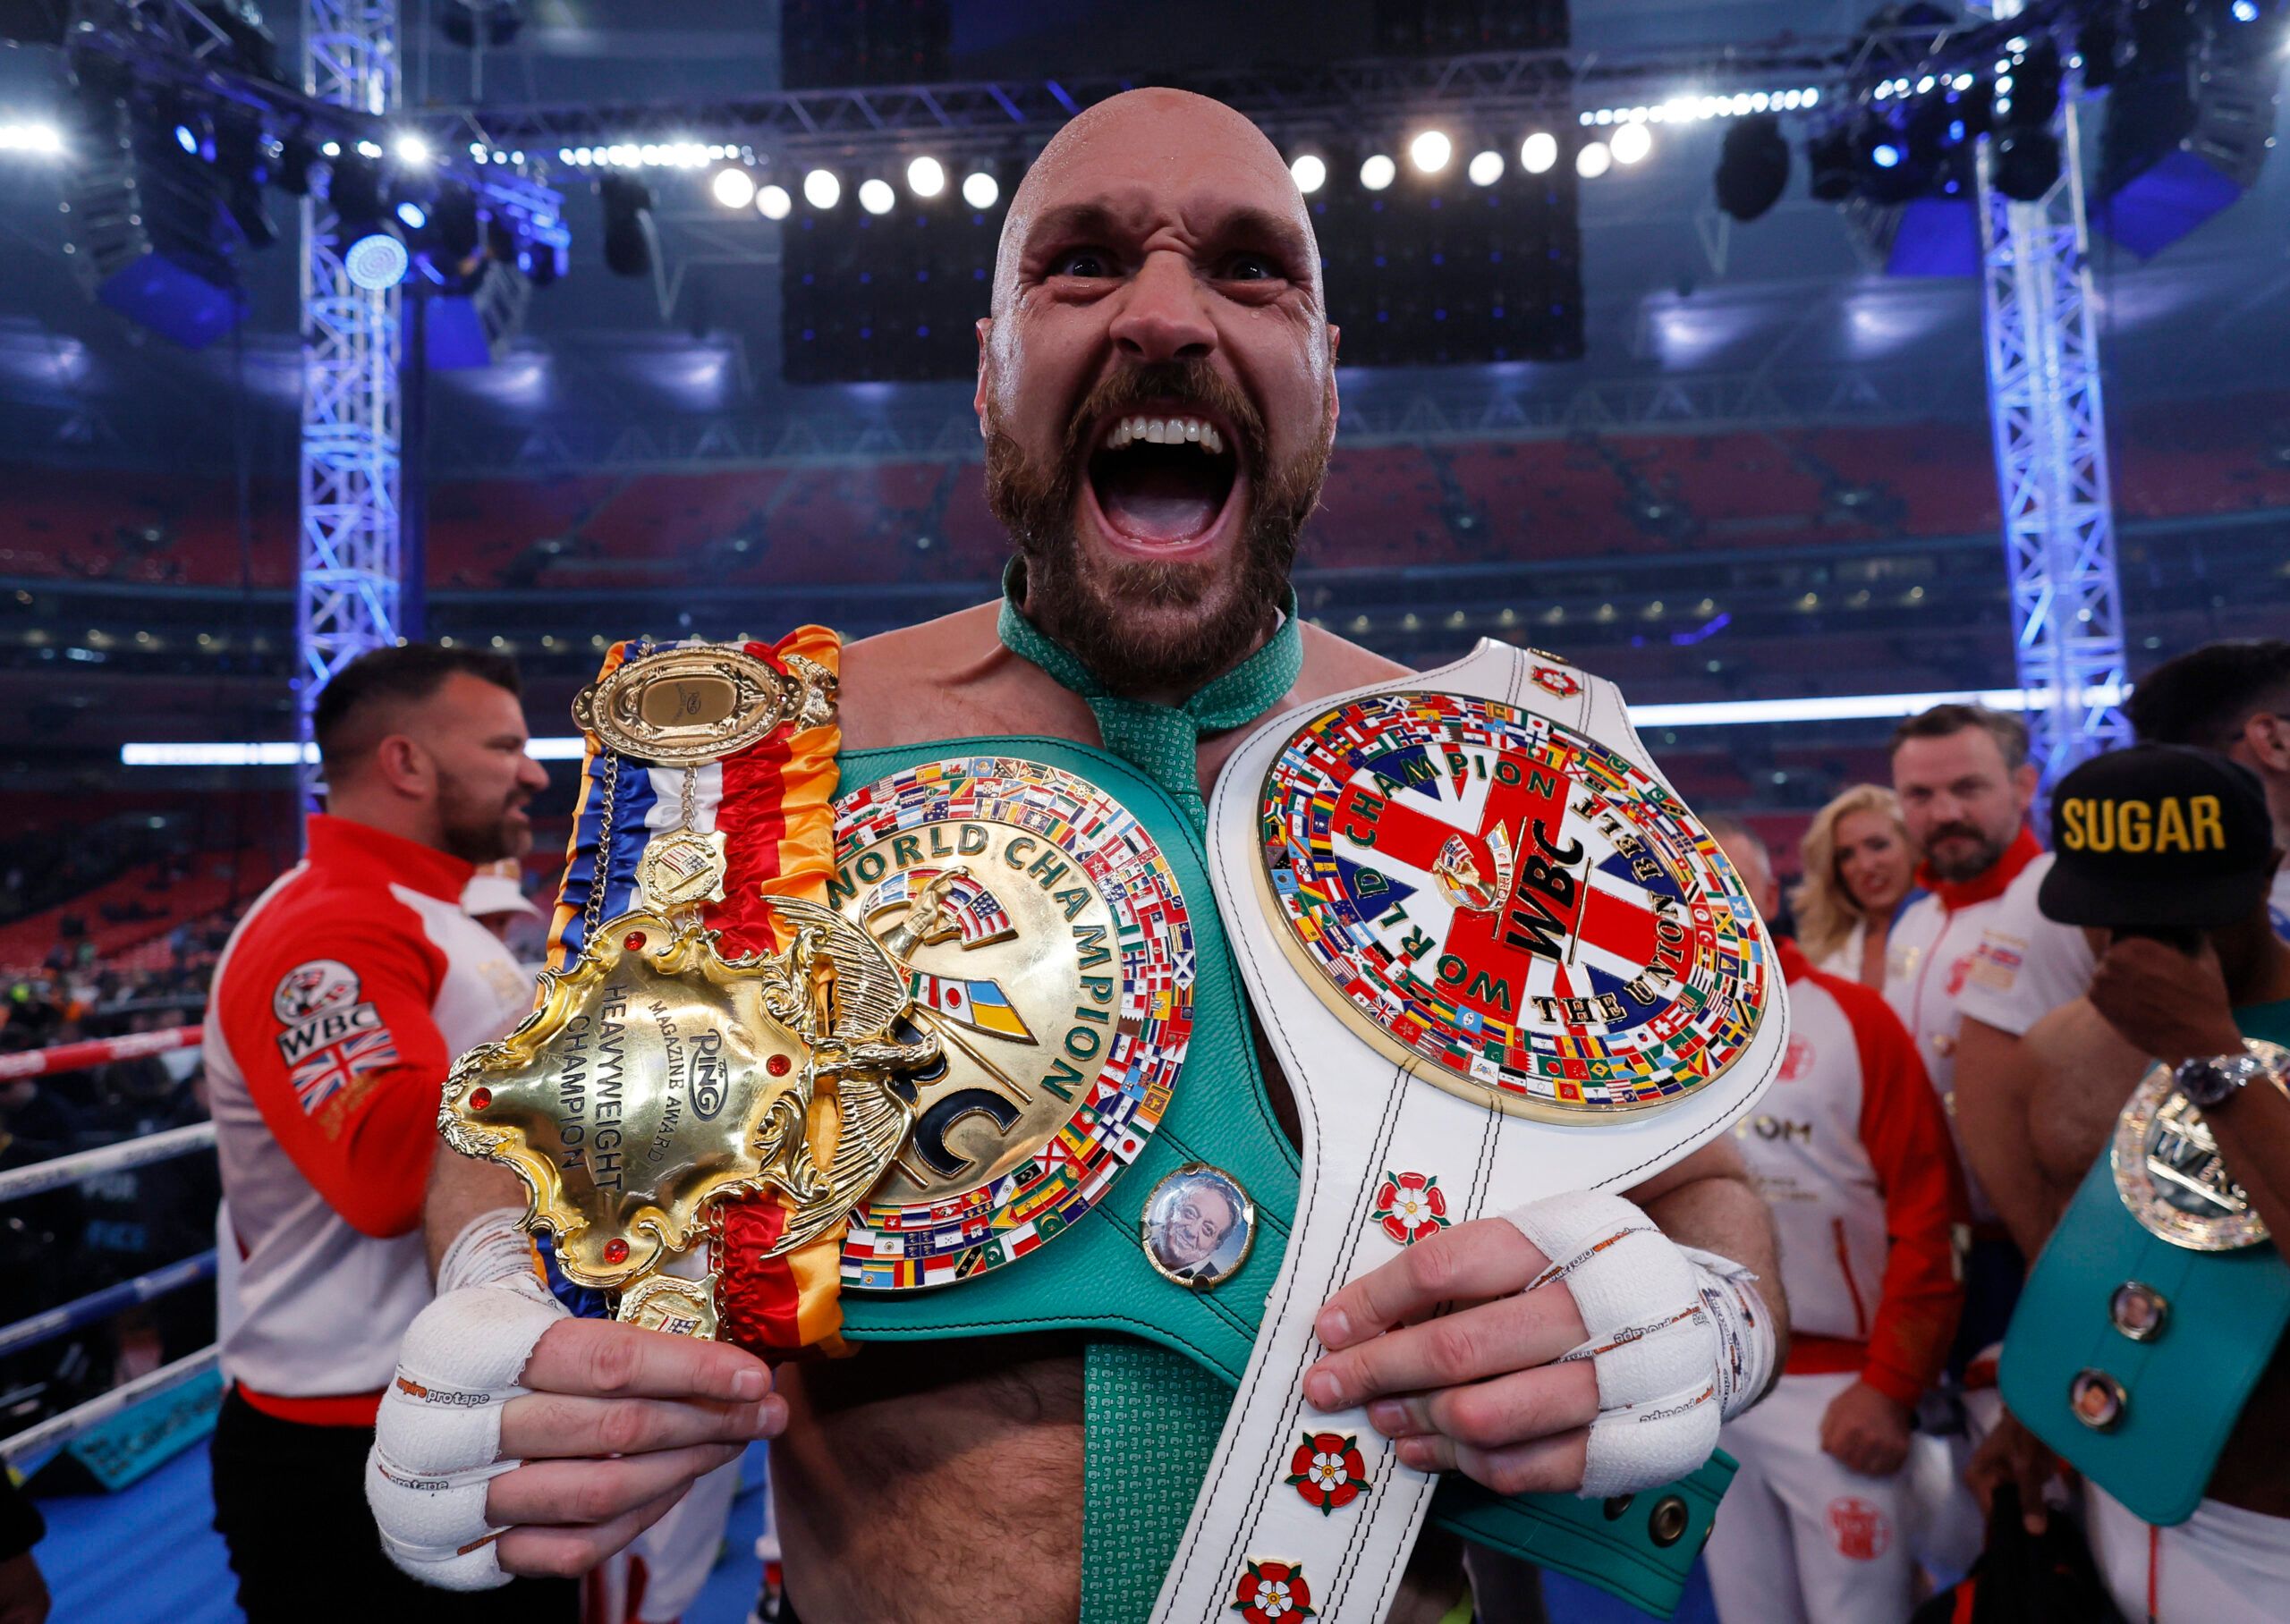 Boxing - Tyson Fury v Dillian Whyte - WBC World Heavyweight Title - Wembley Stadium, London, Britain - April 23, 2022  Tyson Fury celebrates with the belts after winning his fight against Dillian Whyte Action Images via Reuters/Andrew Couldridge